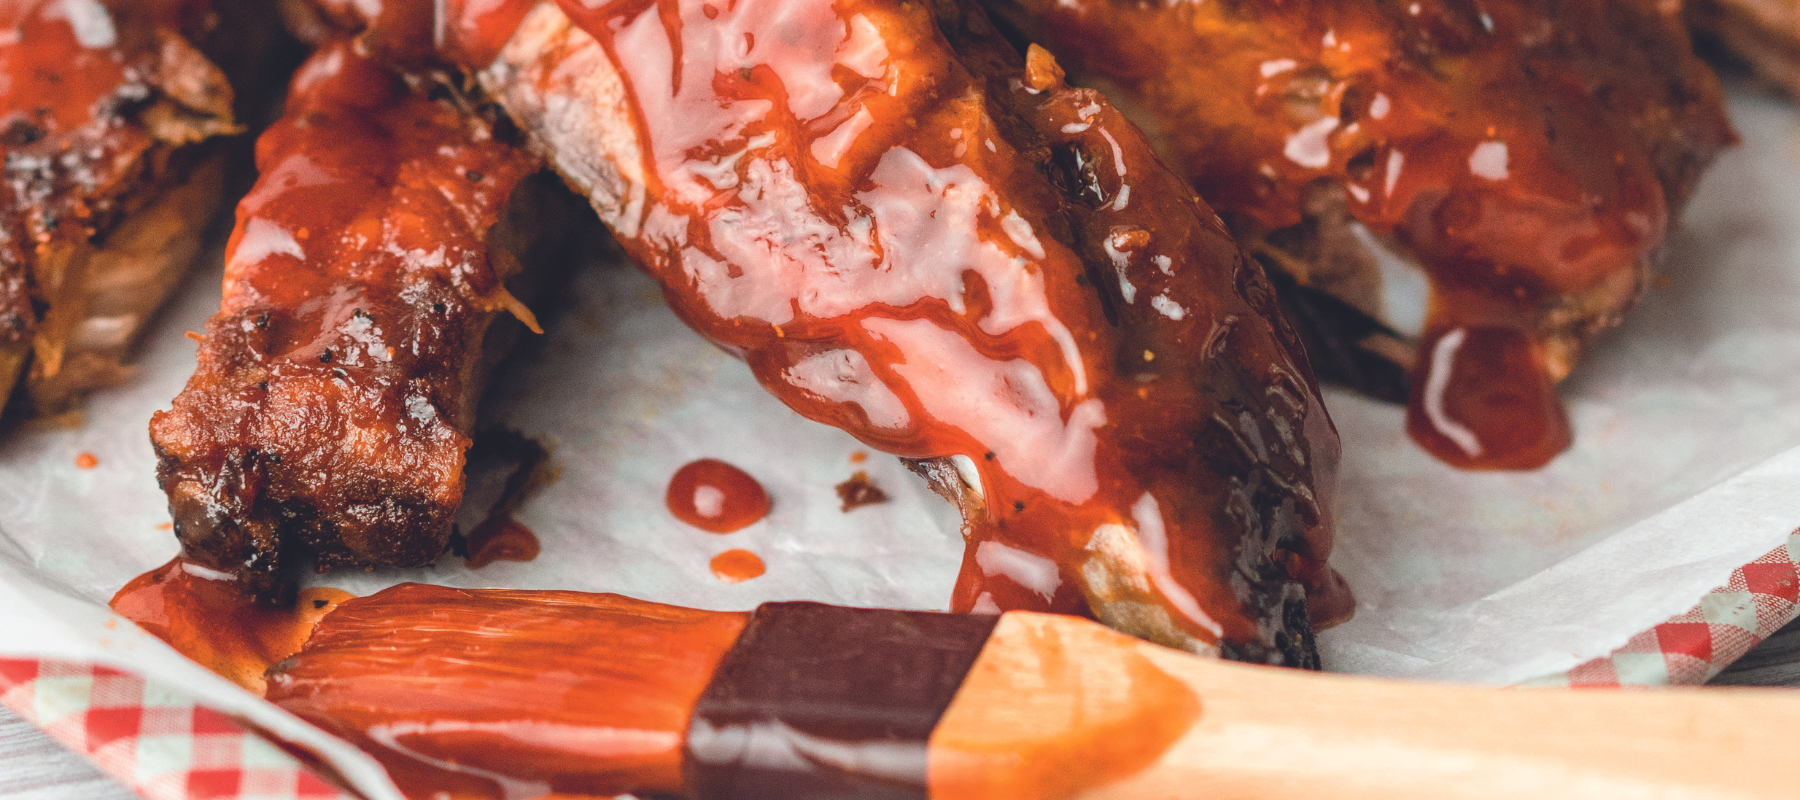 AR Hot honey smokey ribs covered in rich sauce